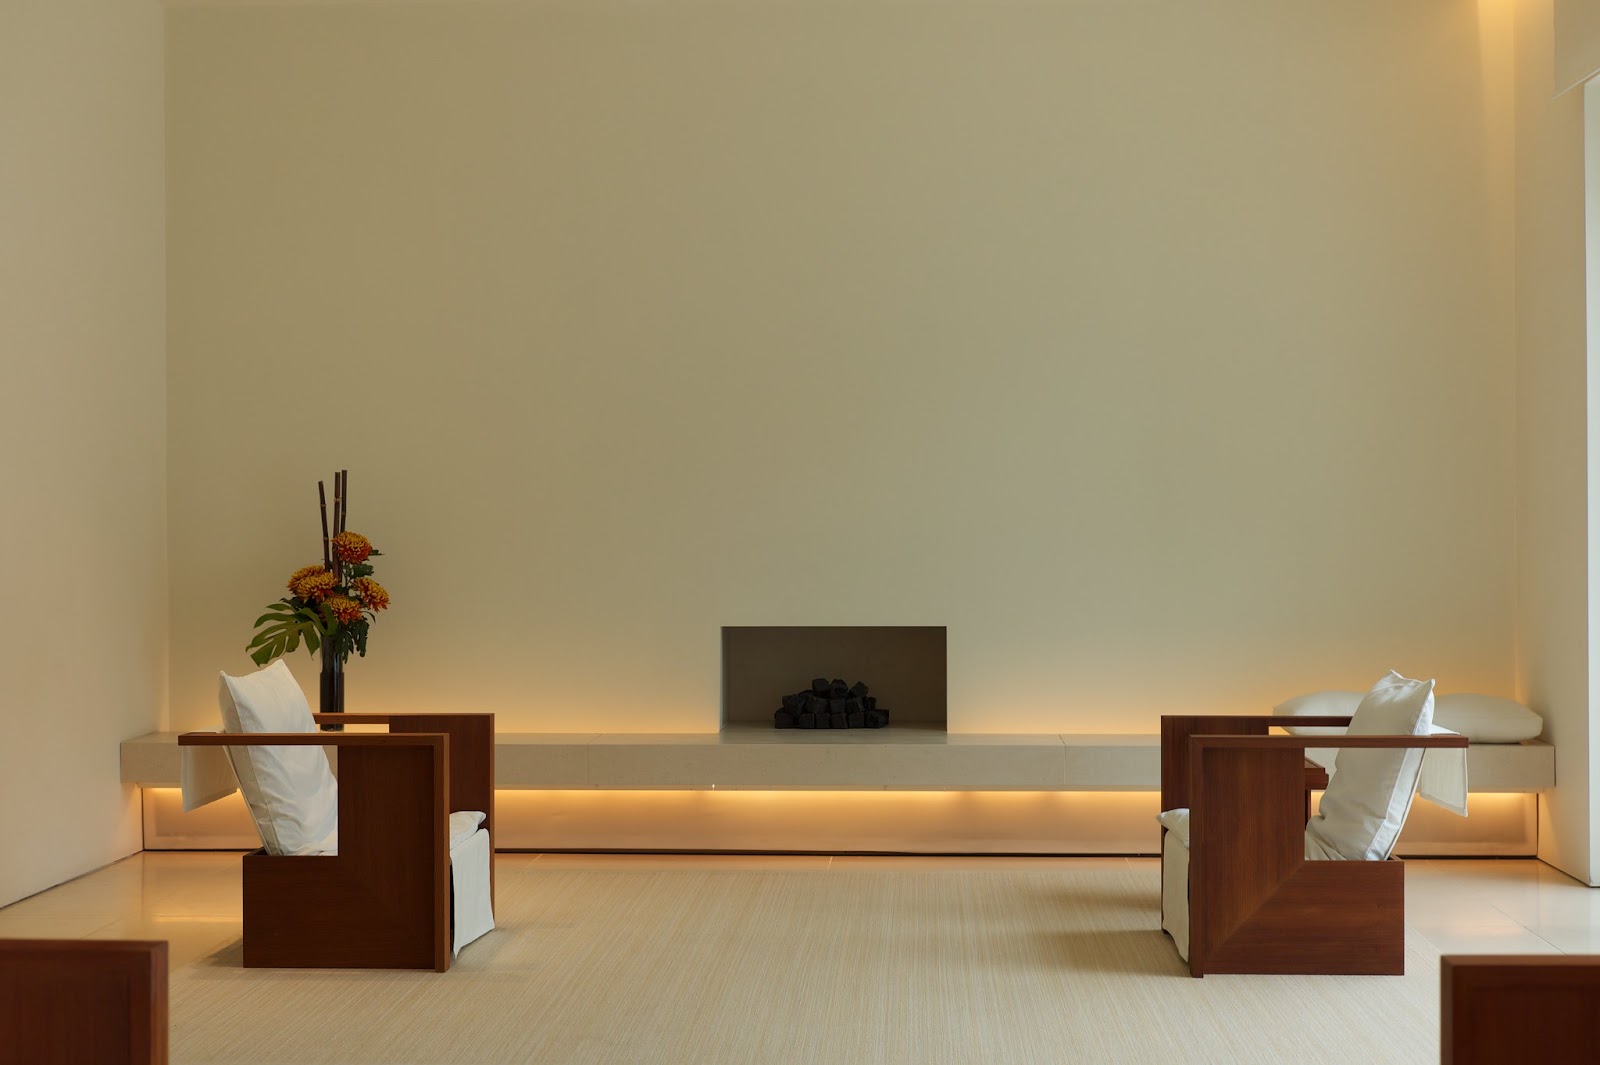 A very simplistic, clean and modern room interior featuring a small fireplace and two armchairs.